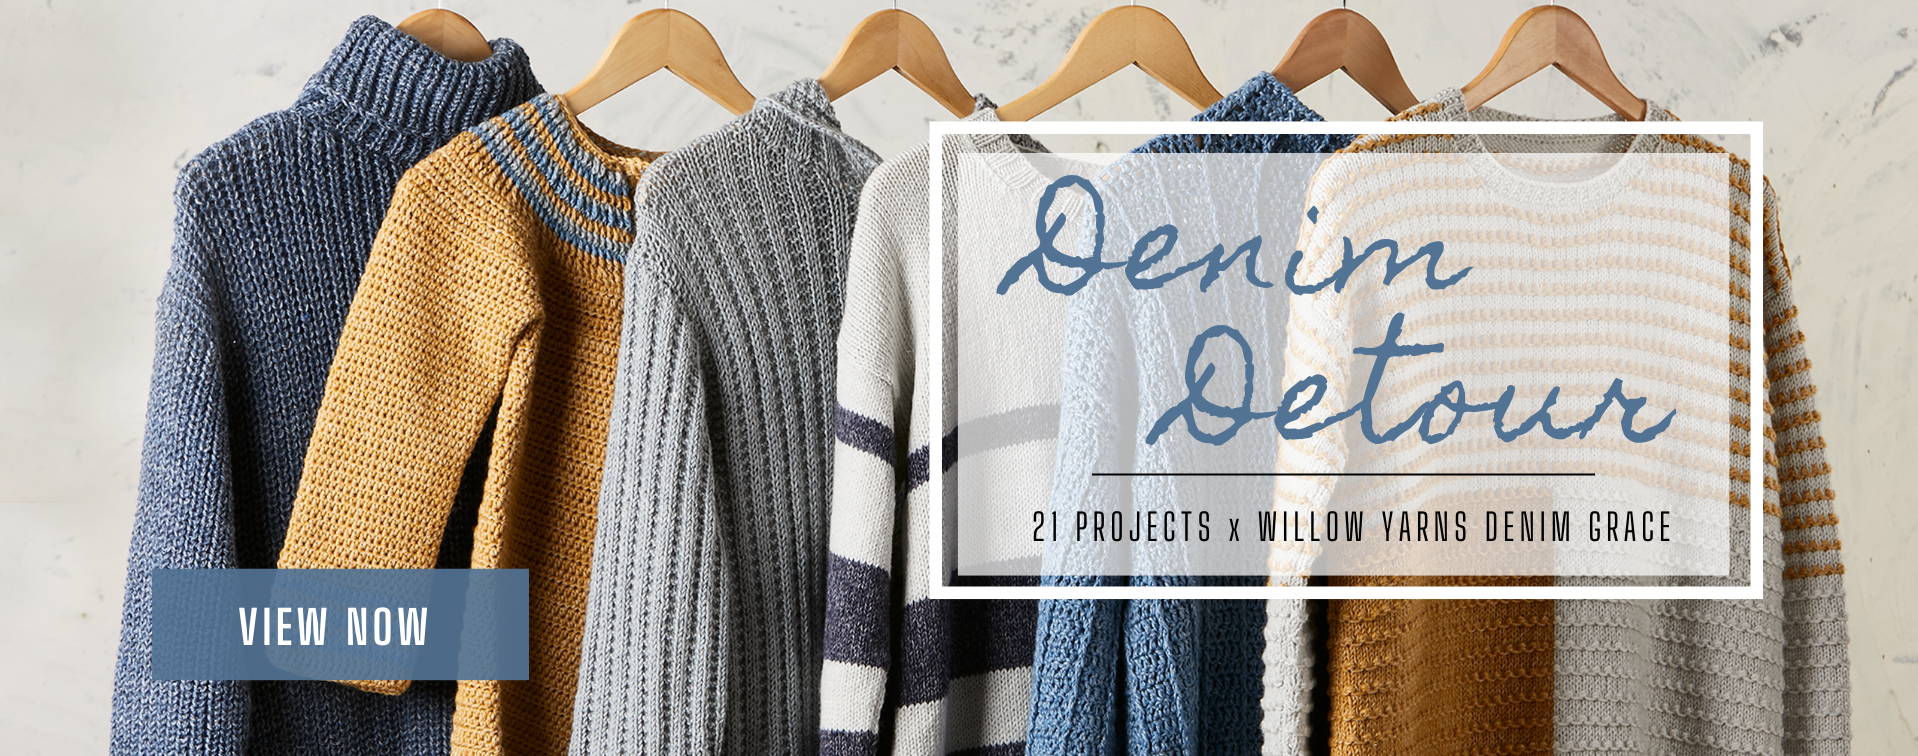 Denim Detou 21 Projects with Willow Yarns Denim Grace